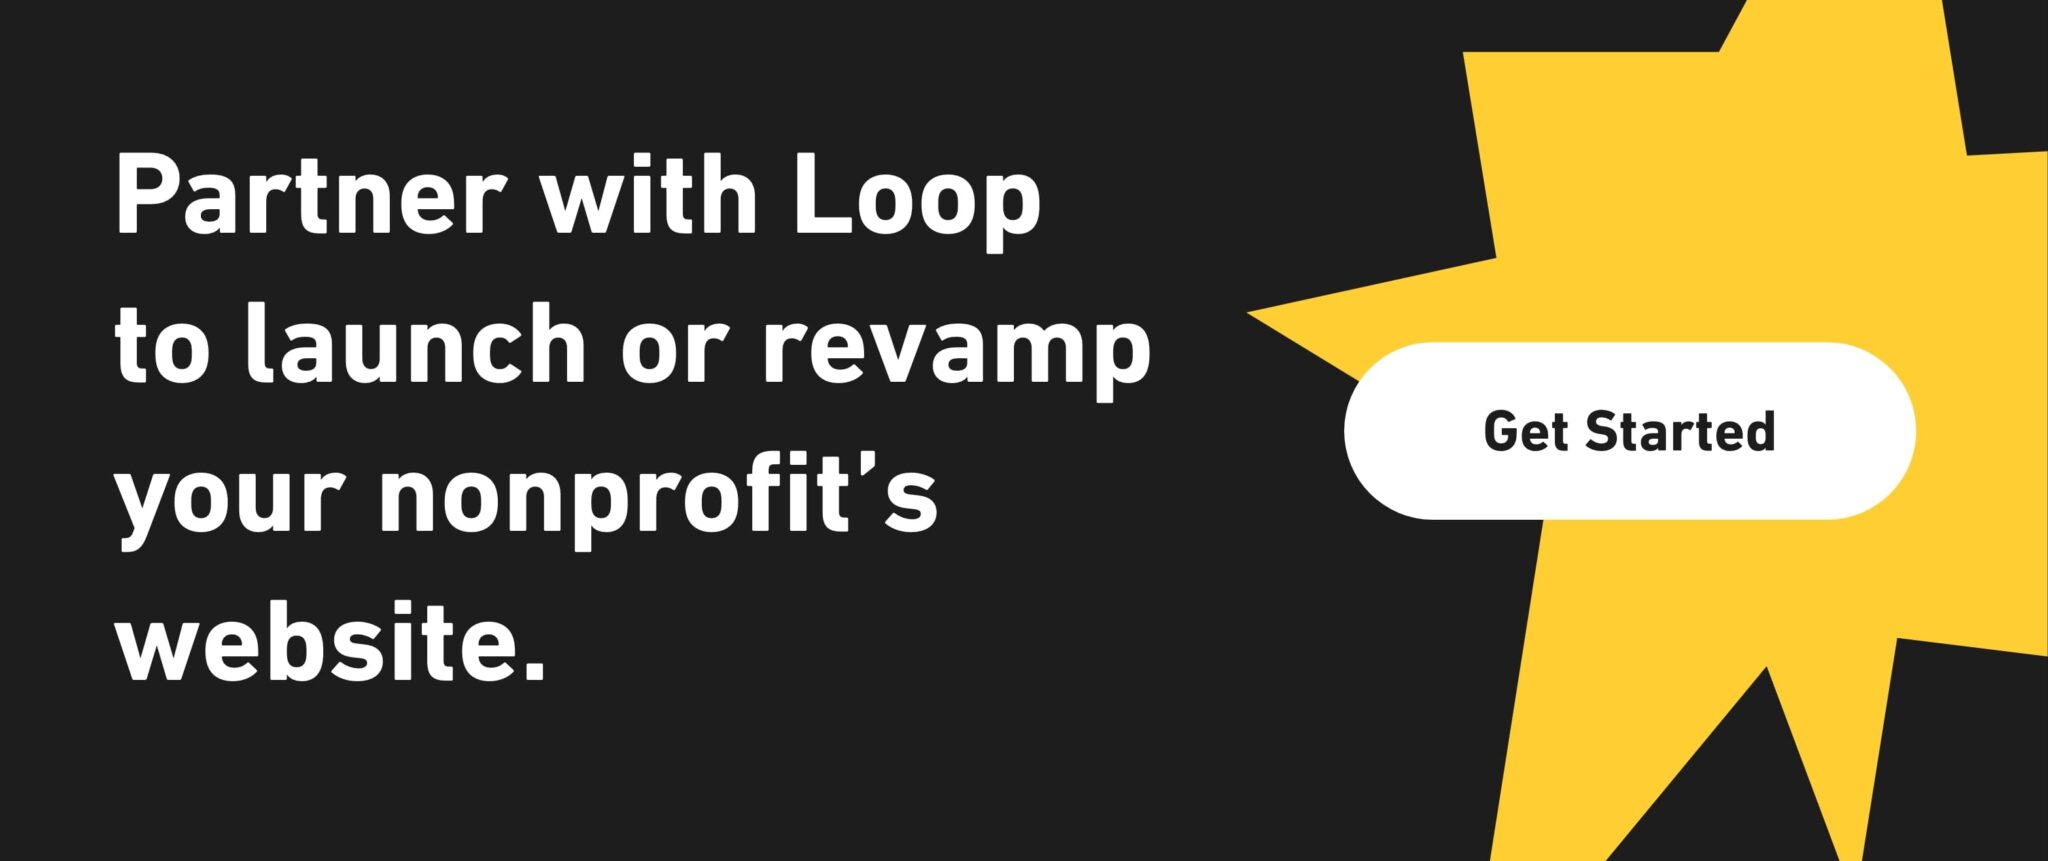 Click here to get started designing your nonprofit's website with Loop.